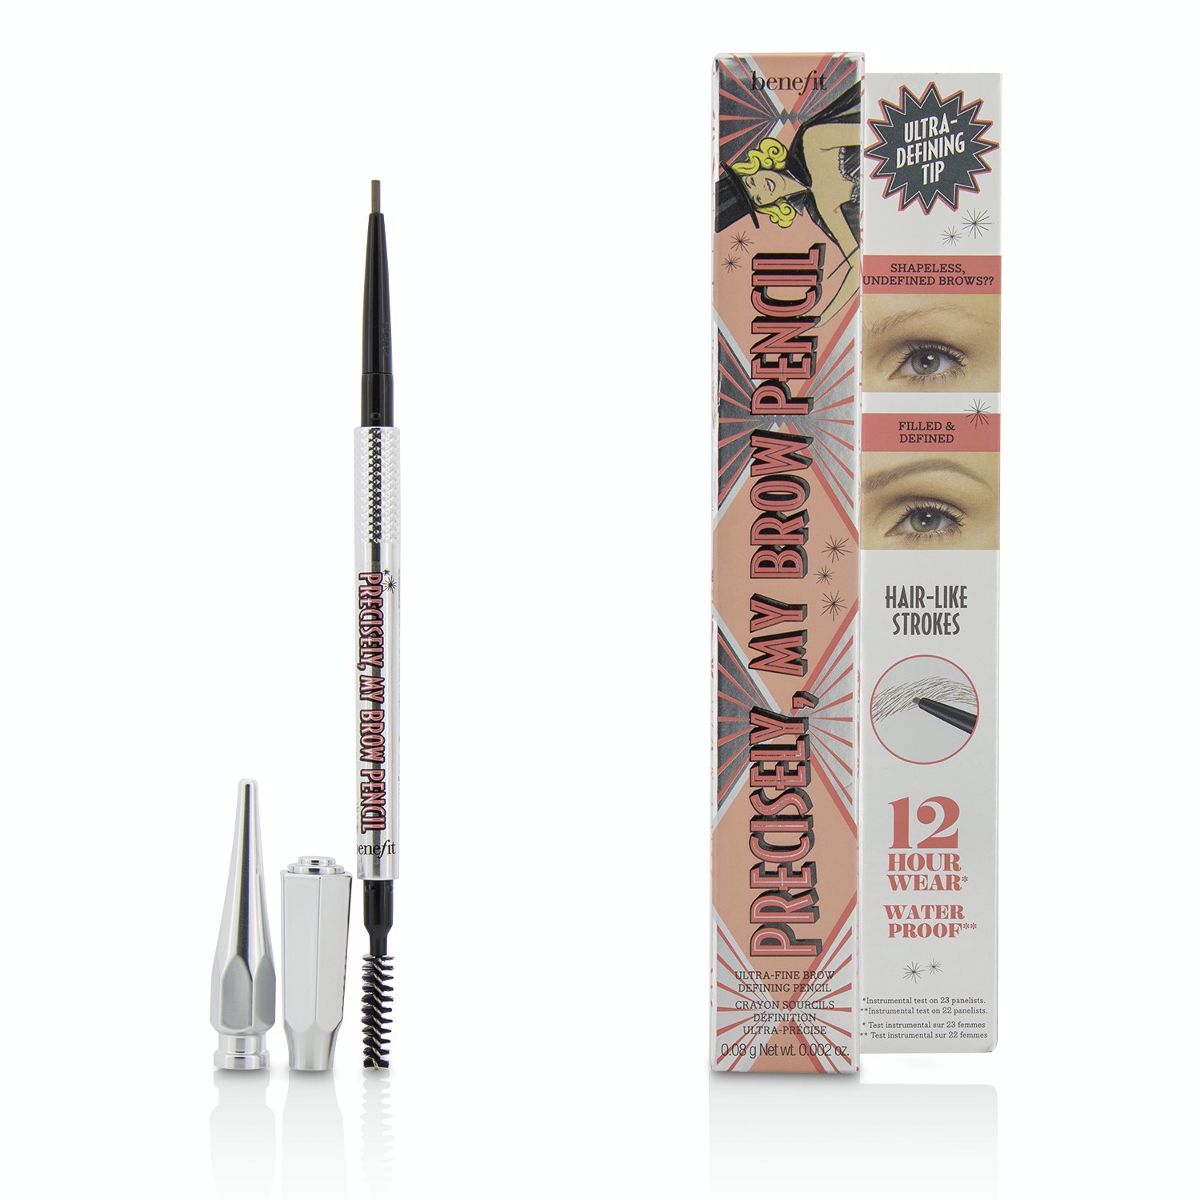 Precisely My Brow Pencil (Ultra Fine Brow Defining Pencil) - # 2 (Light) Benefit Image